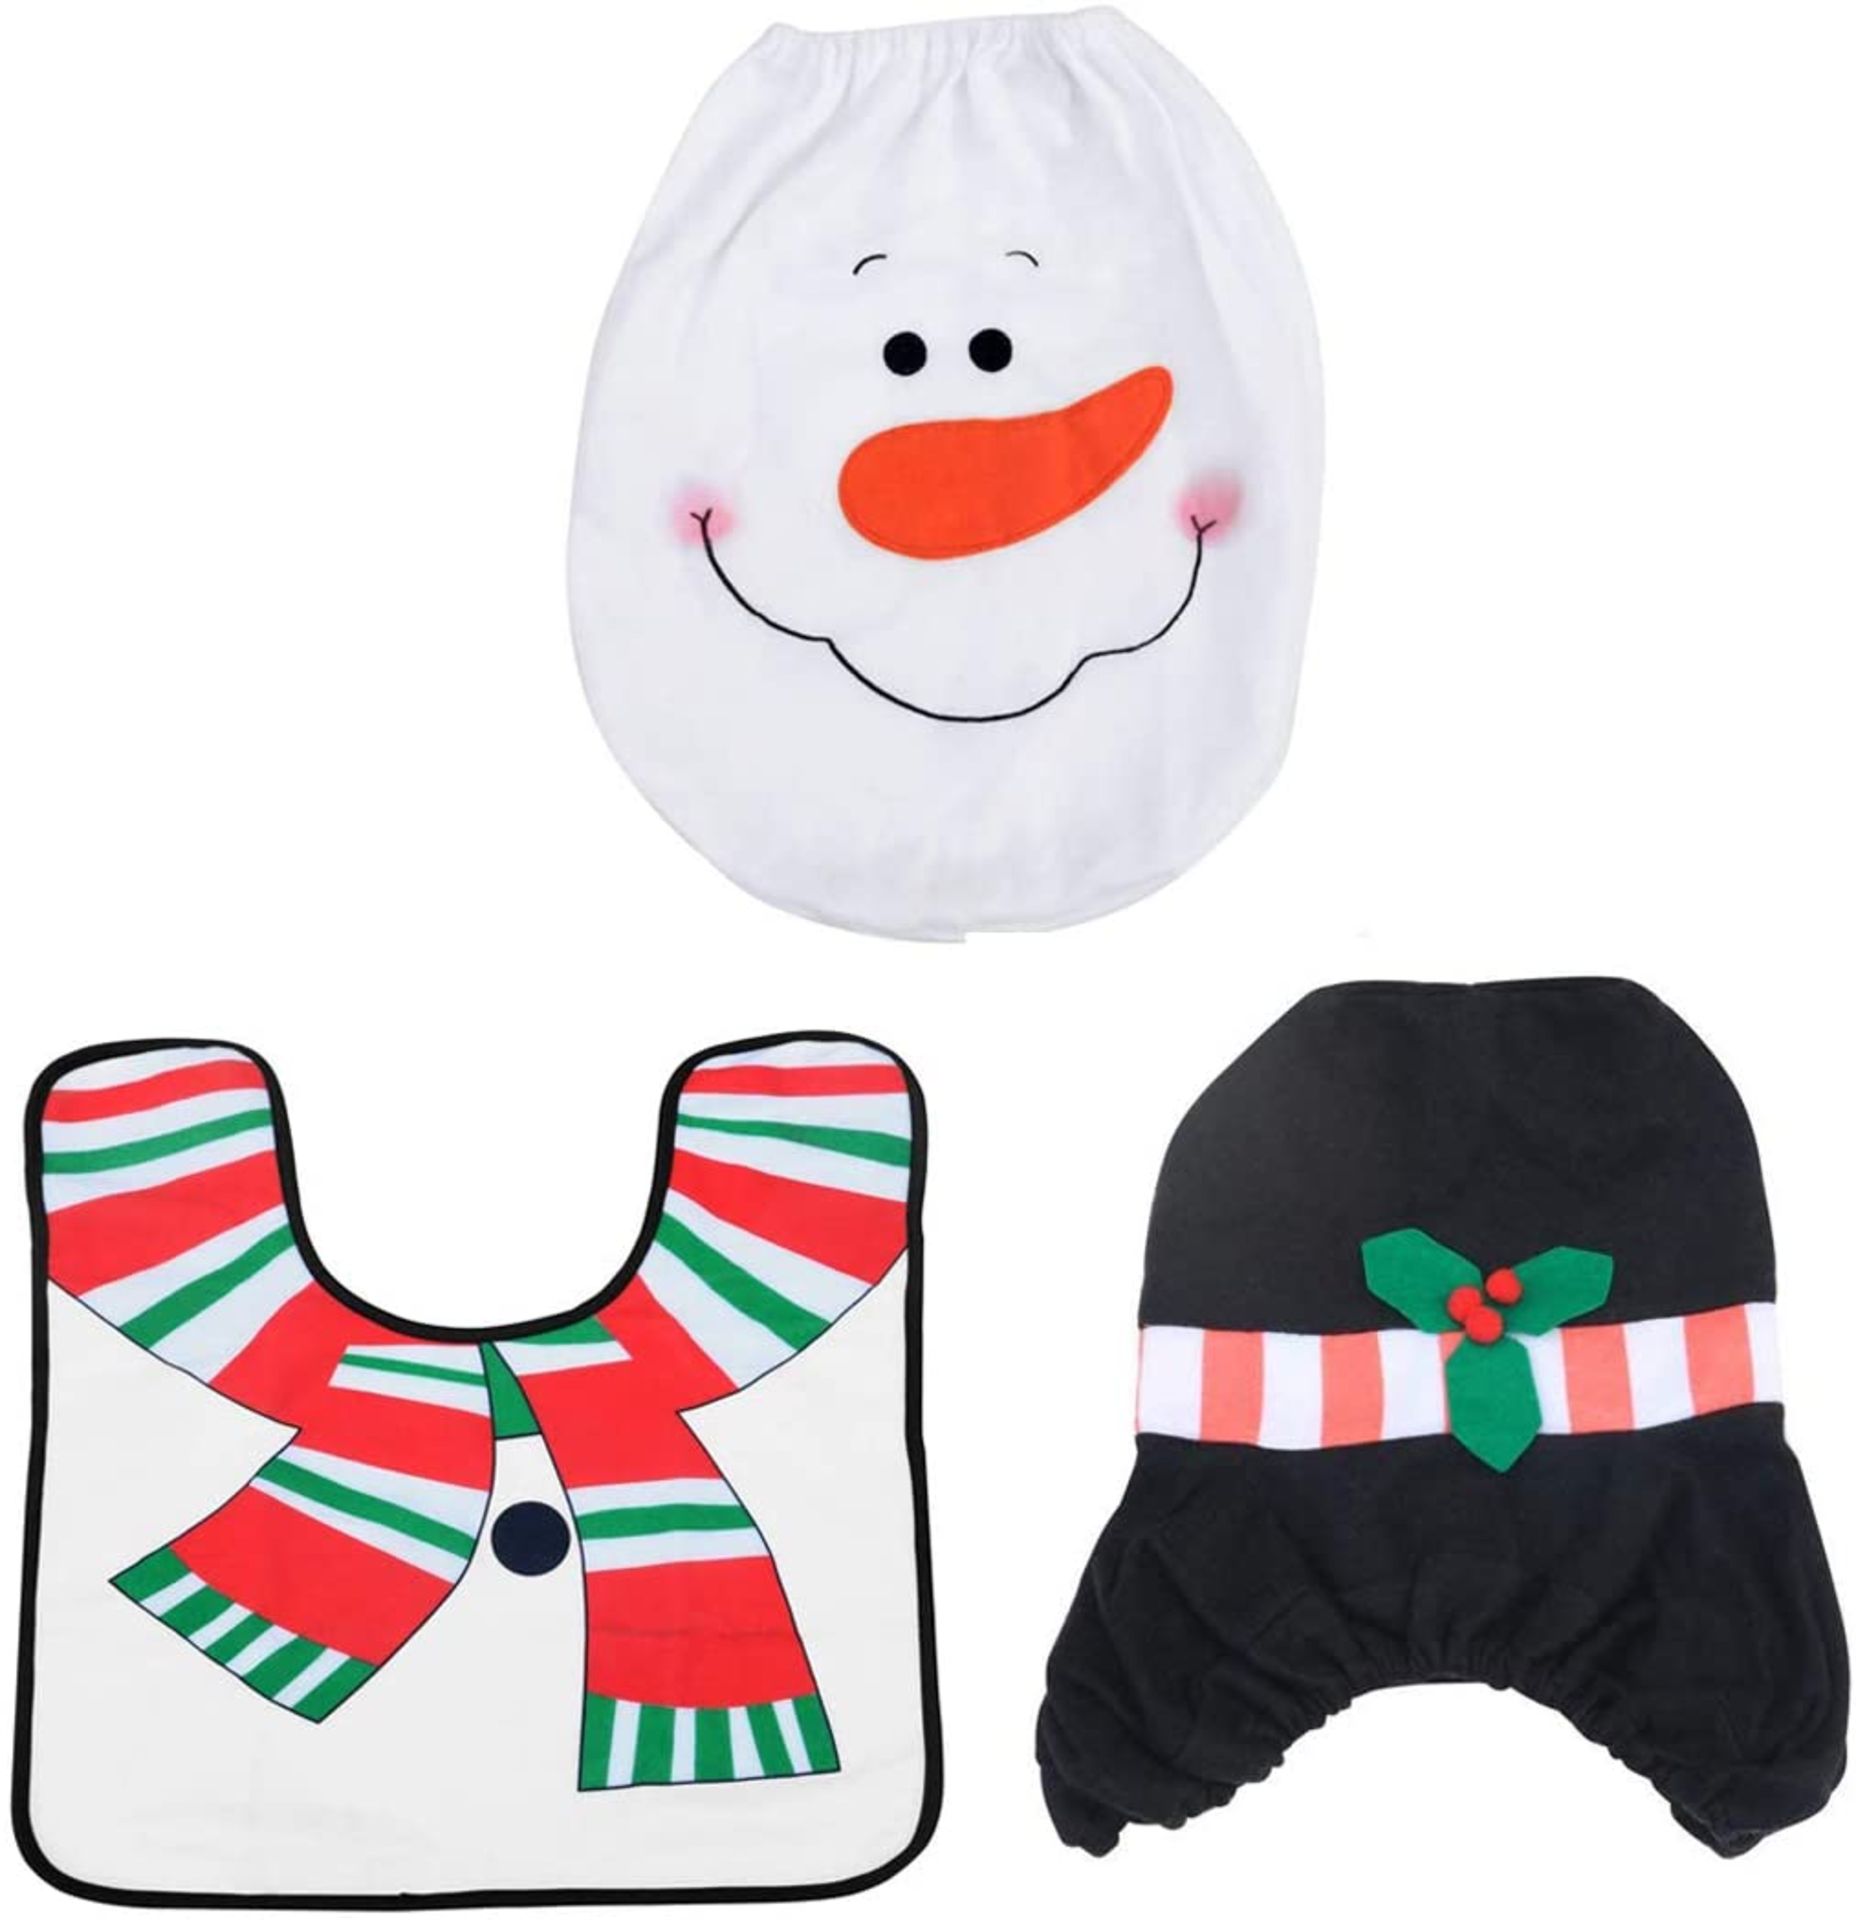 5 x Snowman Toilet Seat Cover, Cistern Cover And Rug Set - Image 2 of 6